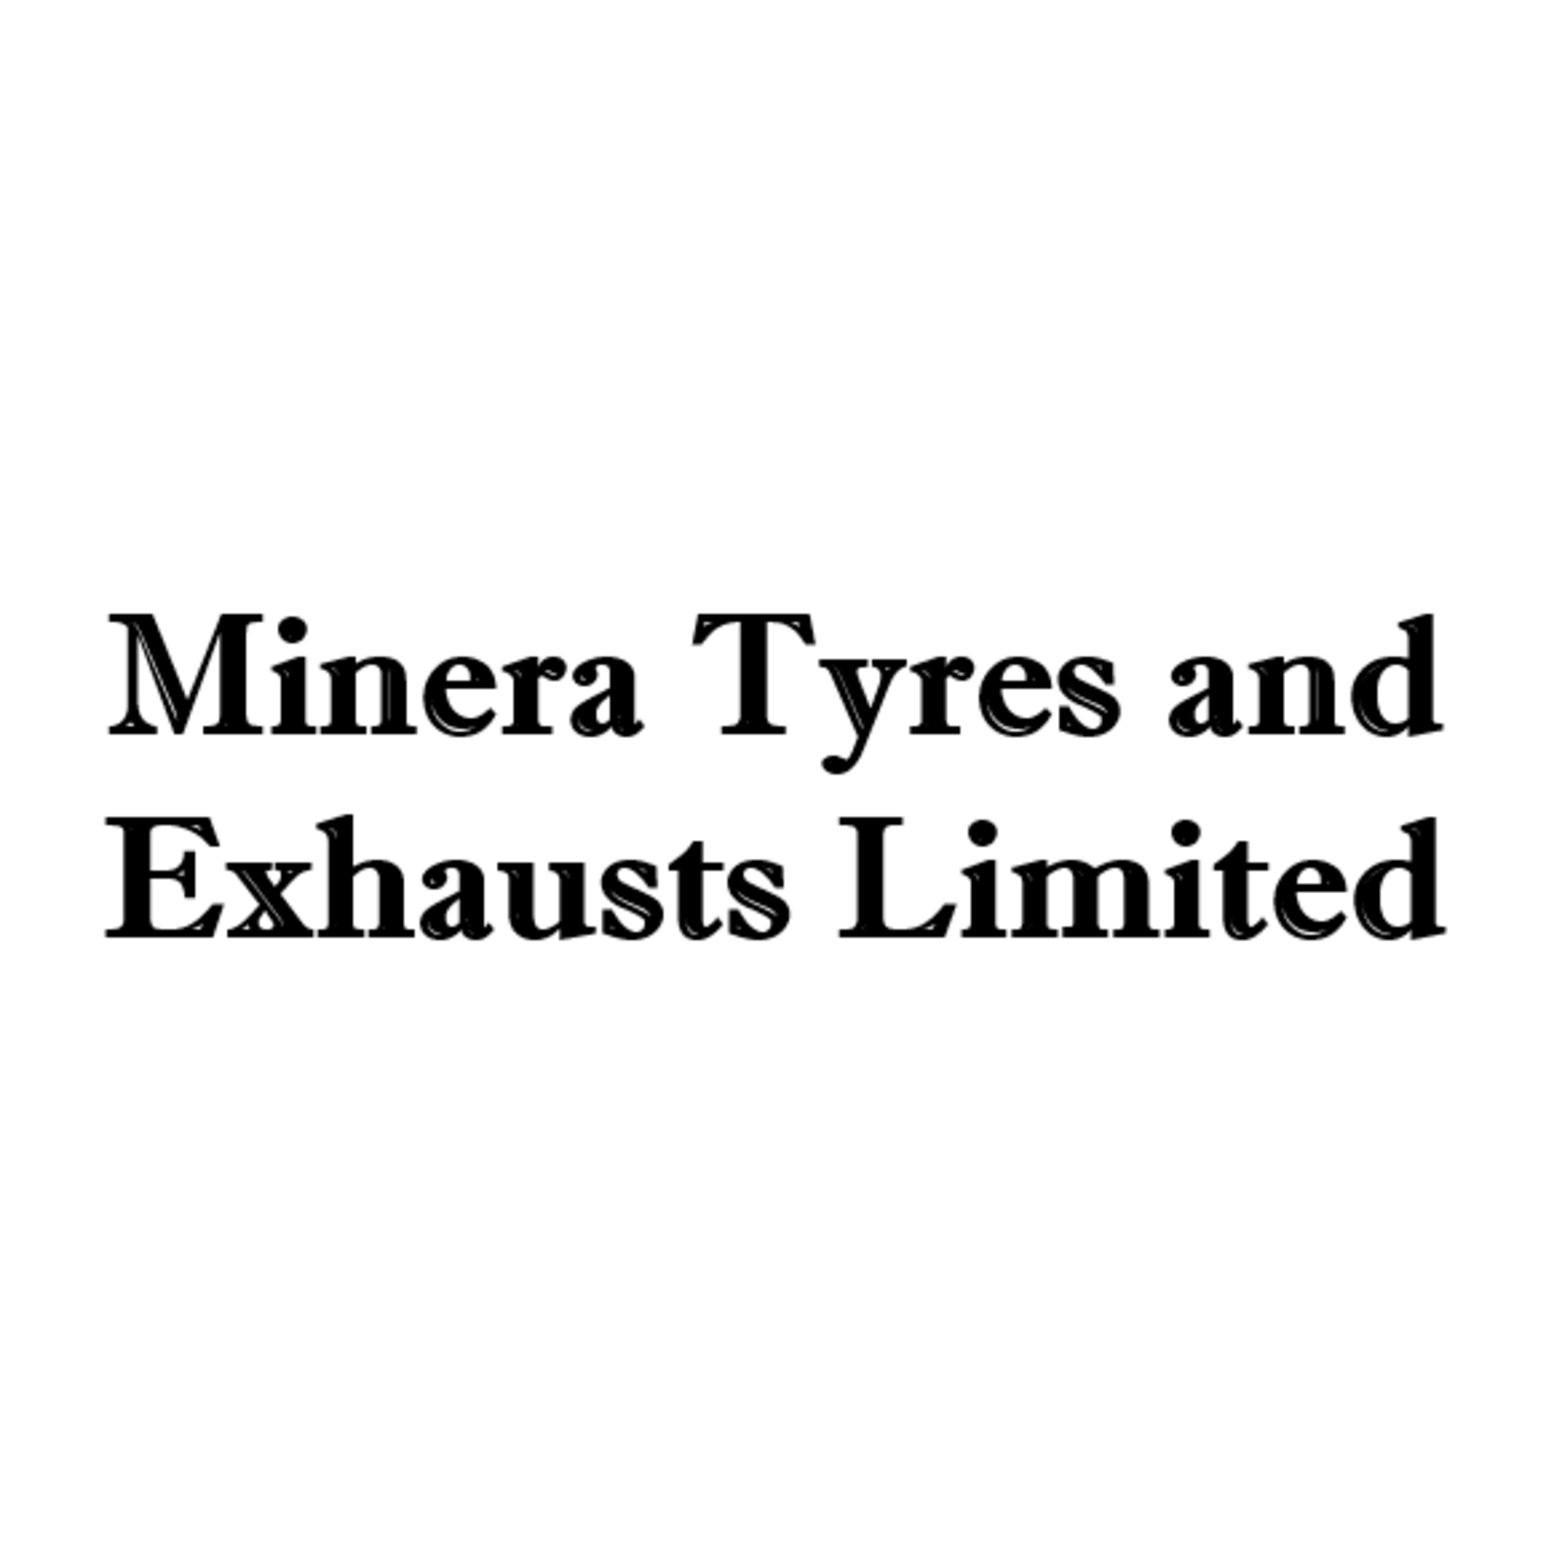 Minera Tyres and Exhausts Limited Logo